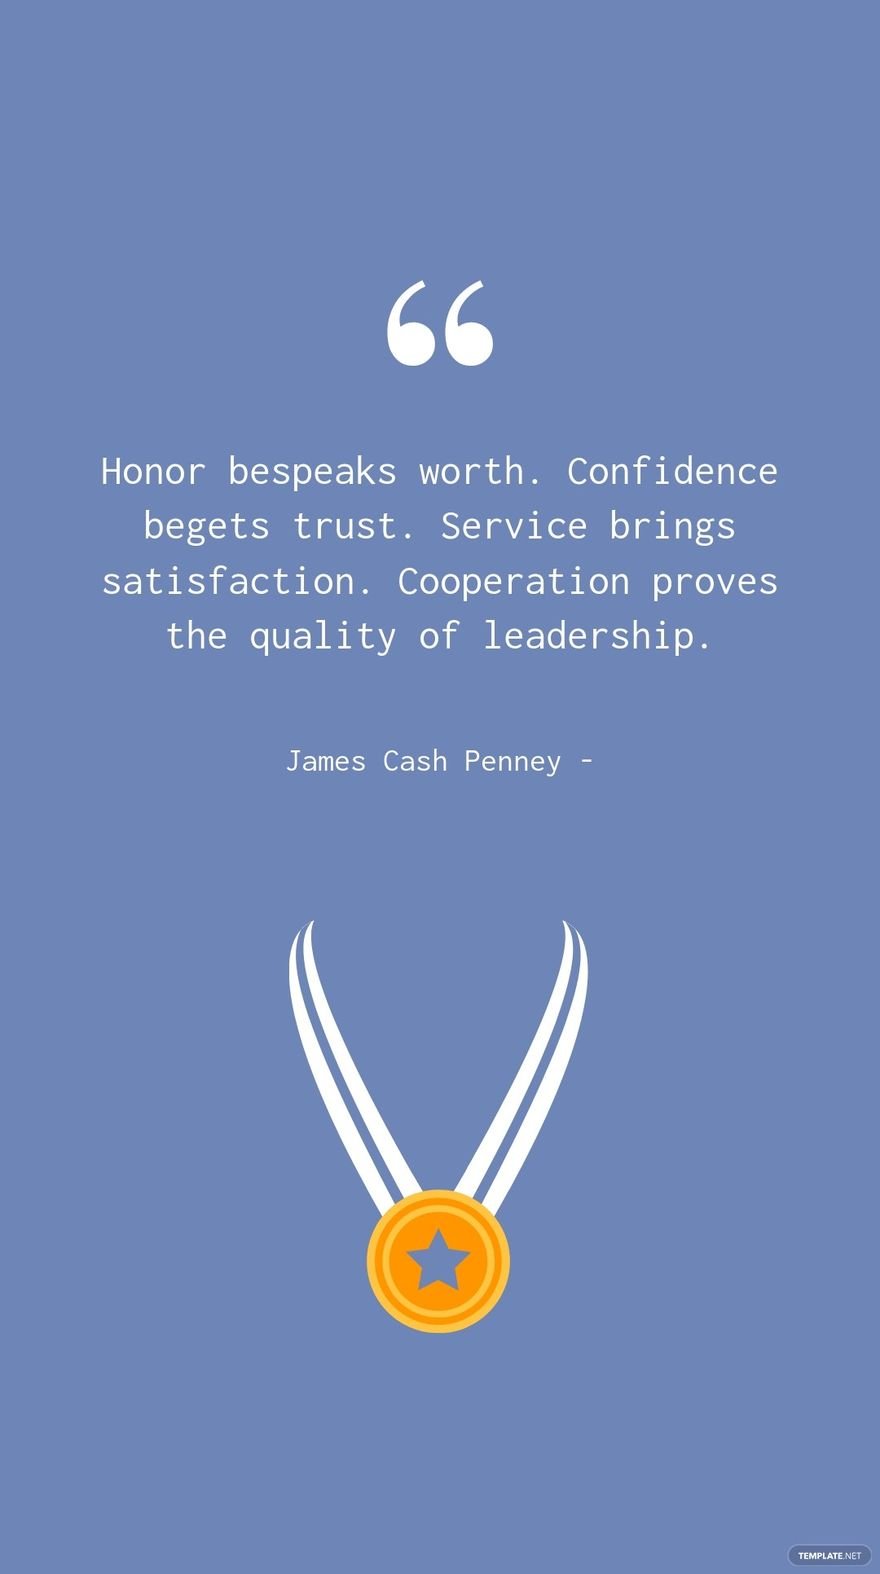 James Cash Penney - Honor bespeaks worth. Confidence begets trust. Service brings satisfaction. Cooperation proves the quality of leadership.